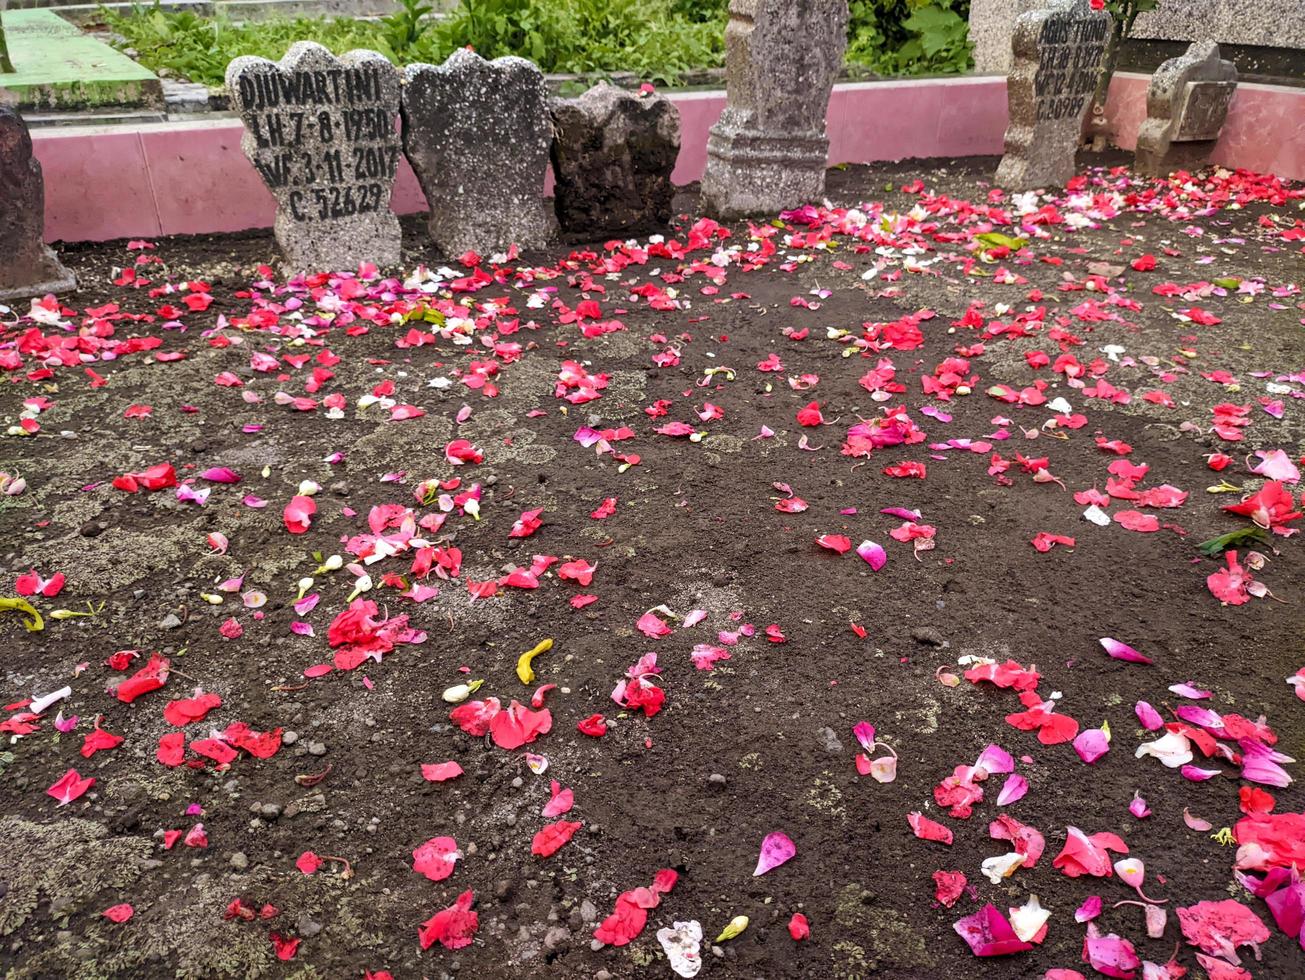 A flowers sprinkled on graves photo